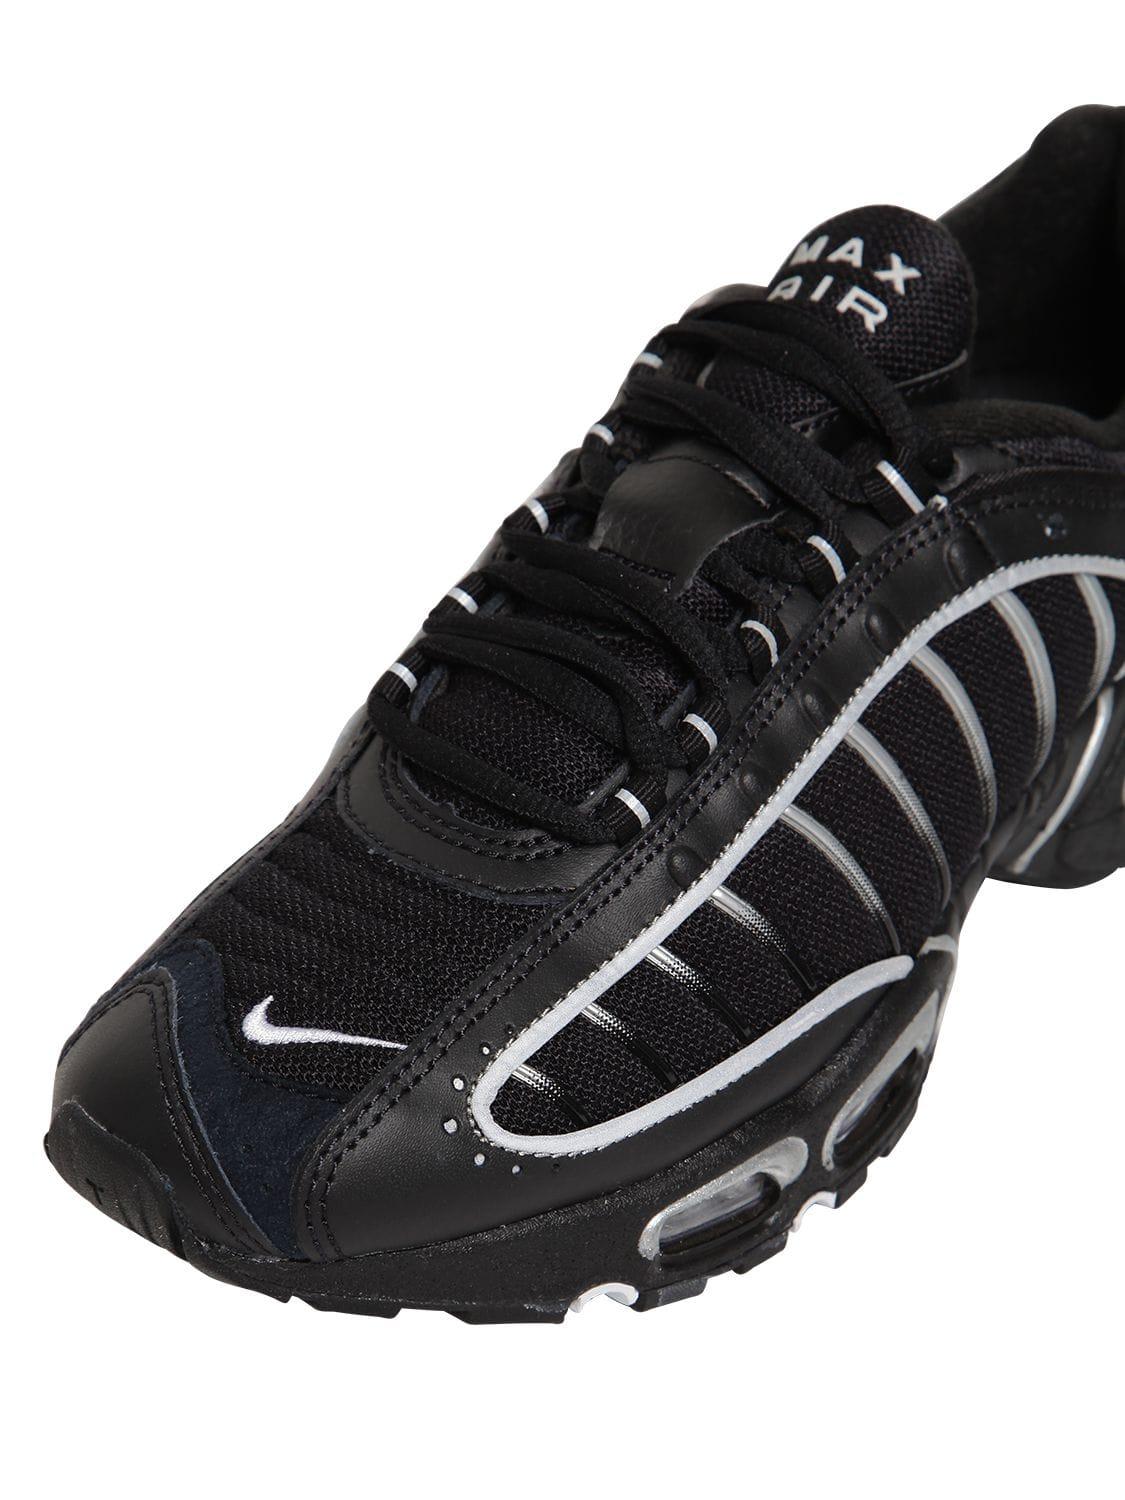 Nike Air Max Tailwind Iv Sneakers in Black/Black (White) for Men - Save 58%  | Lyst